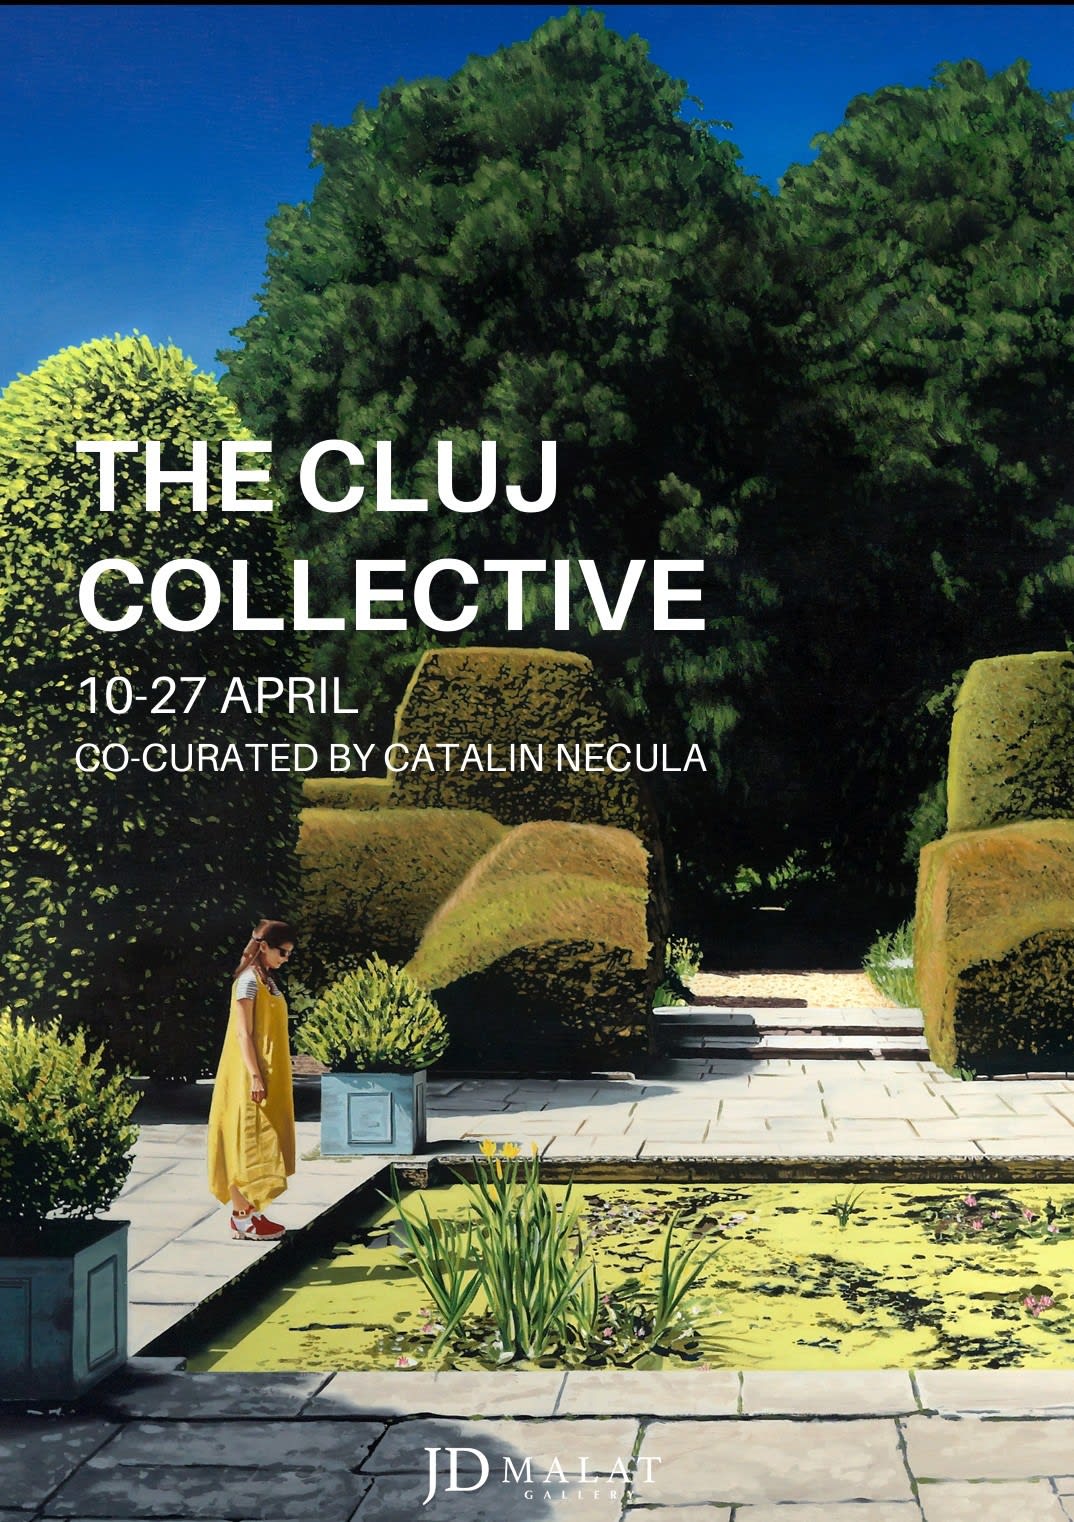 'The Cluj Collective' | A Group Exhibition at JD Malat Gallery in London